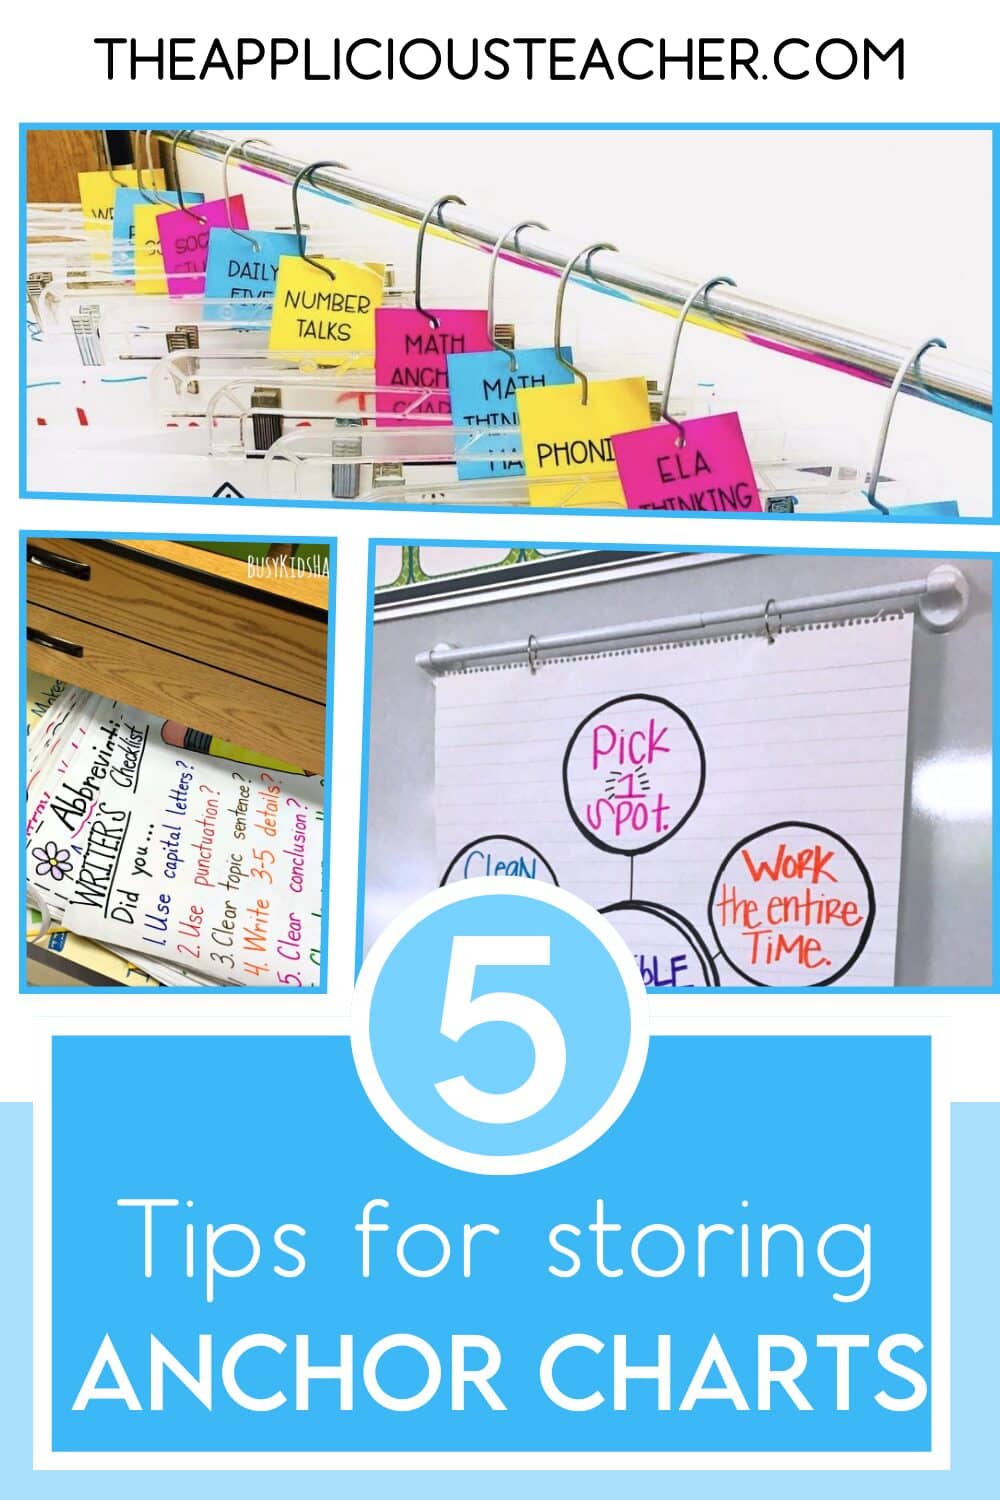 Genius hacks for anchor chart storage. Love these simple ways for storing anchor charts. TheAppliciousTeacher.com